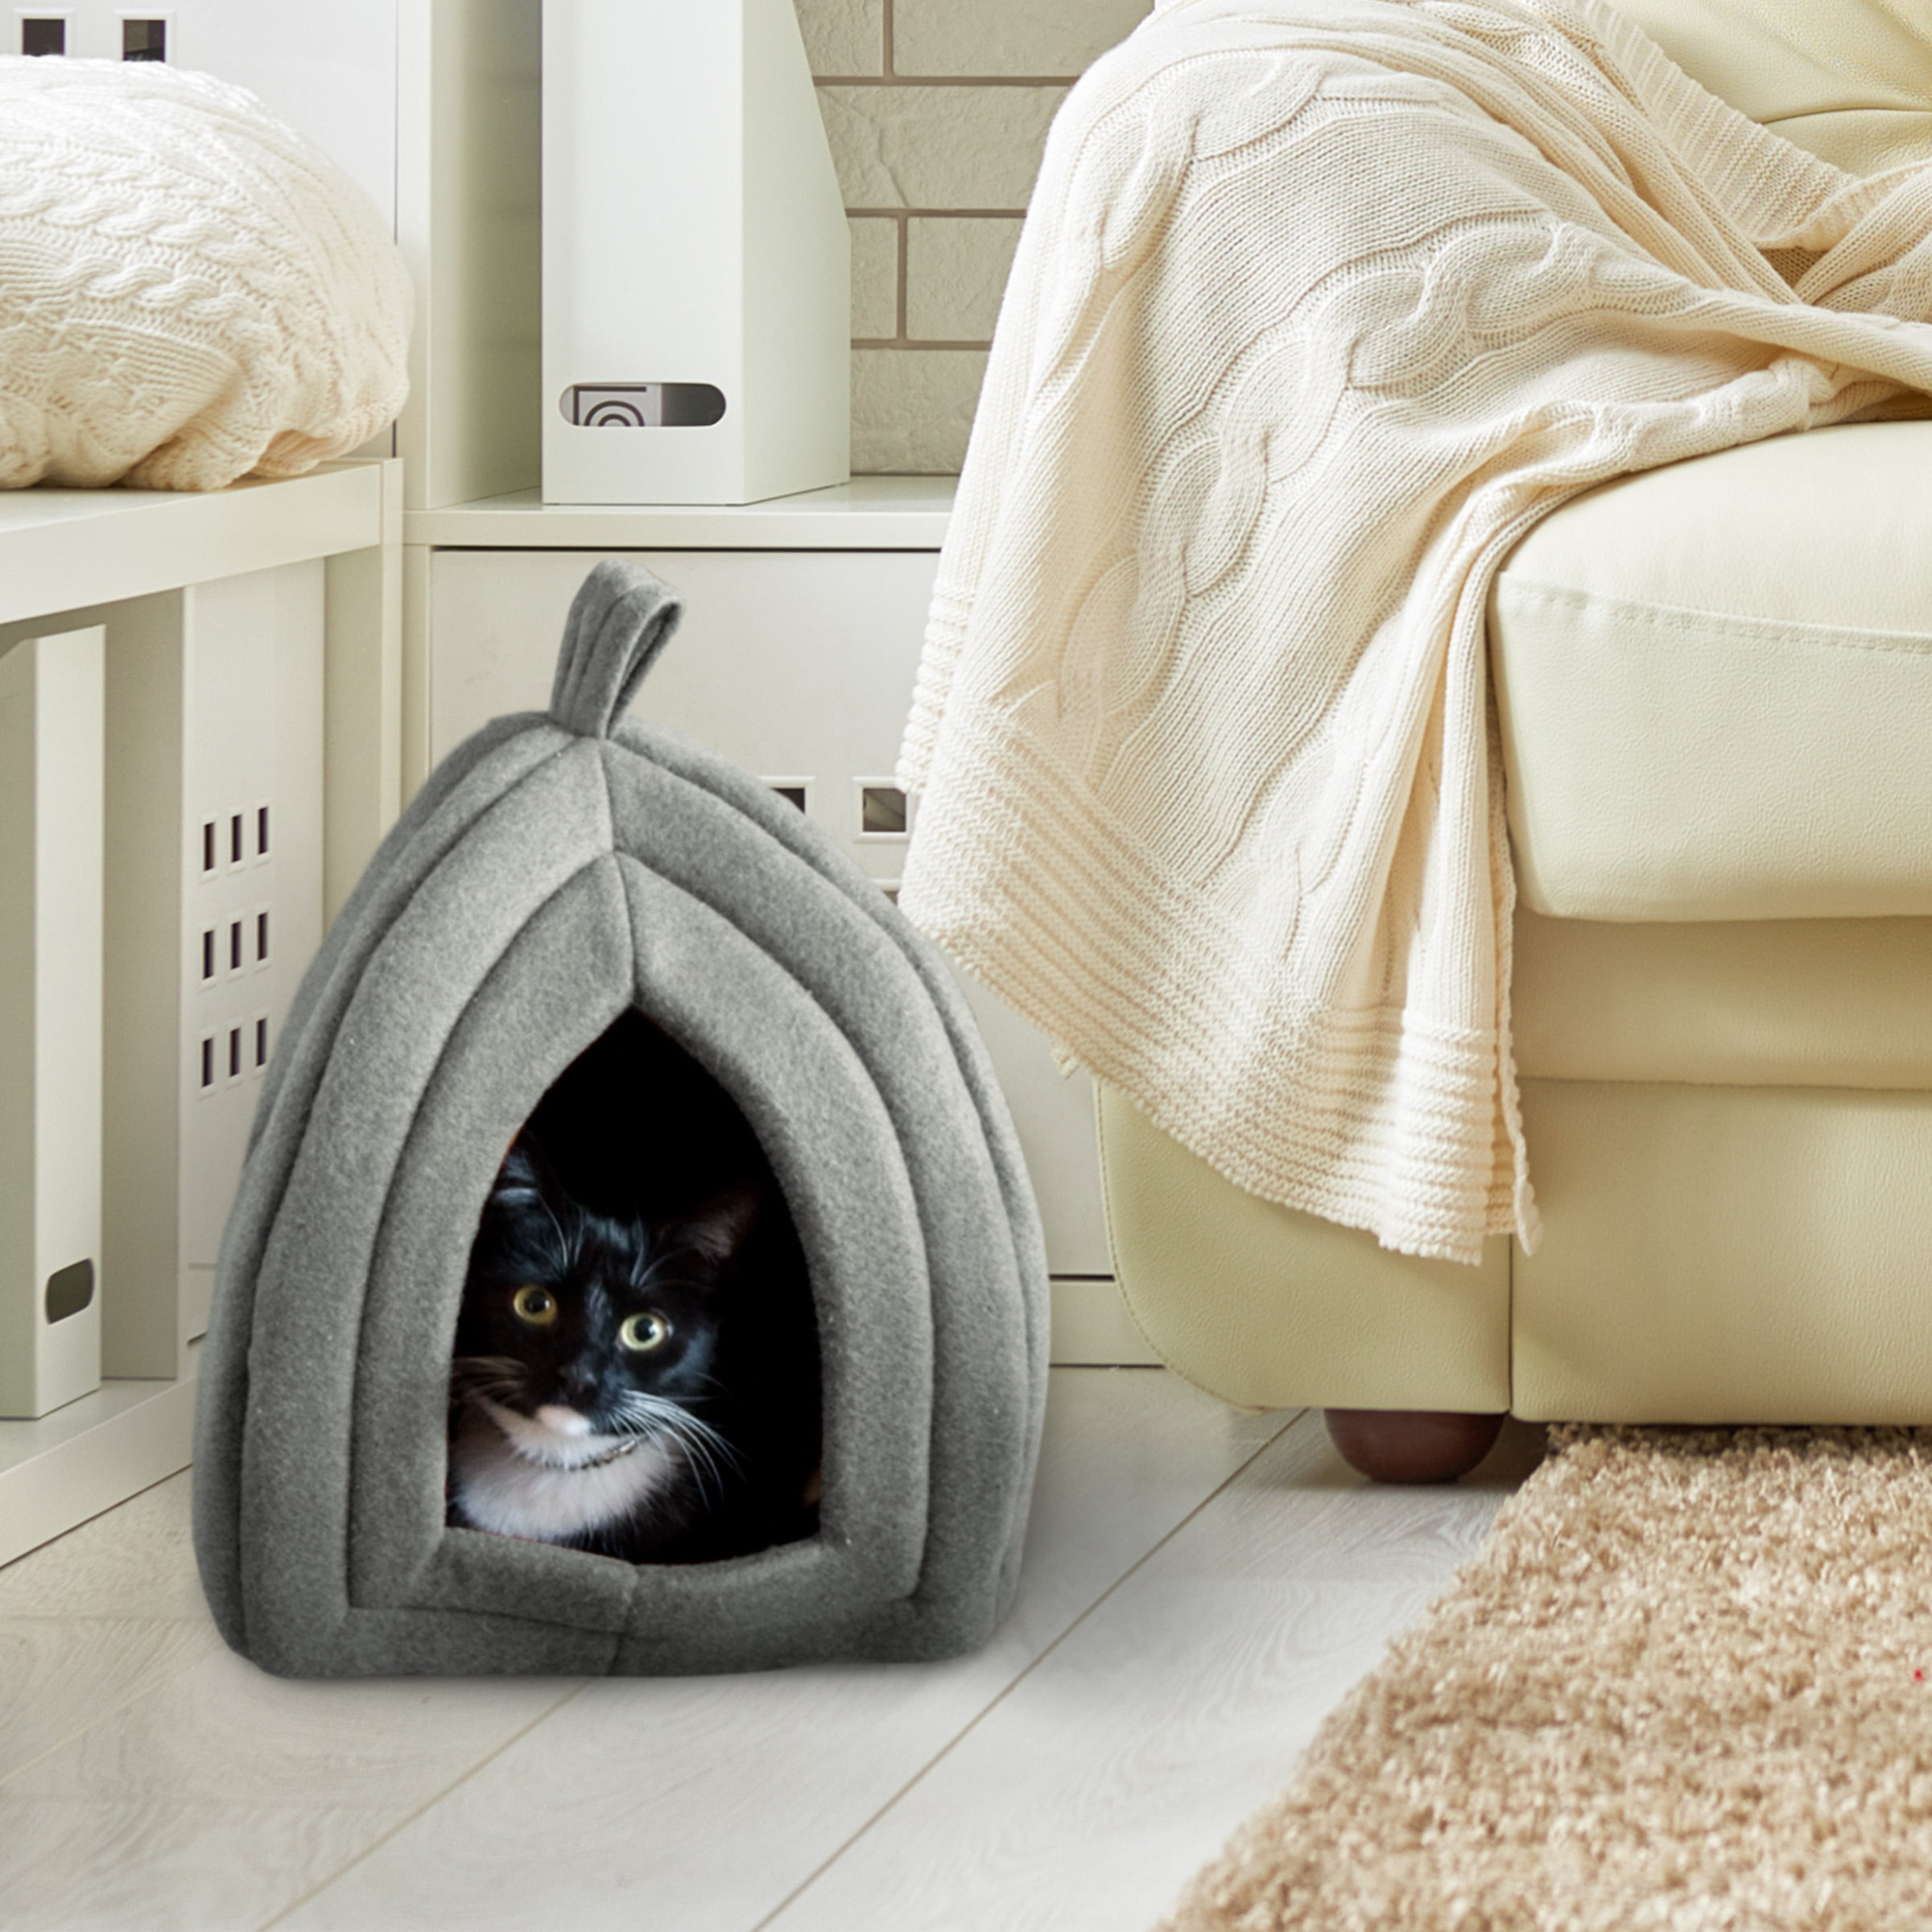 Cat House - Indoor Bed with Removable Foam Cushion - Pet Tent for Puppies, Rabbits, Guinea Pigs, Hedgehogs, and Other Small Animals by PETMAKER (Gray)